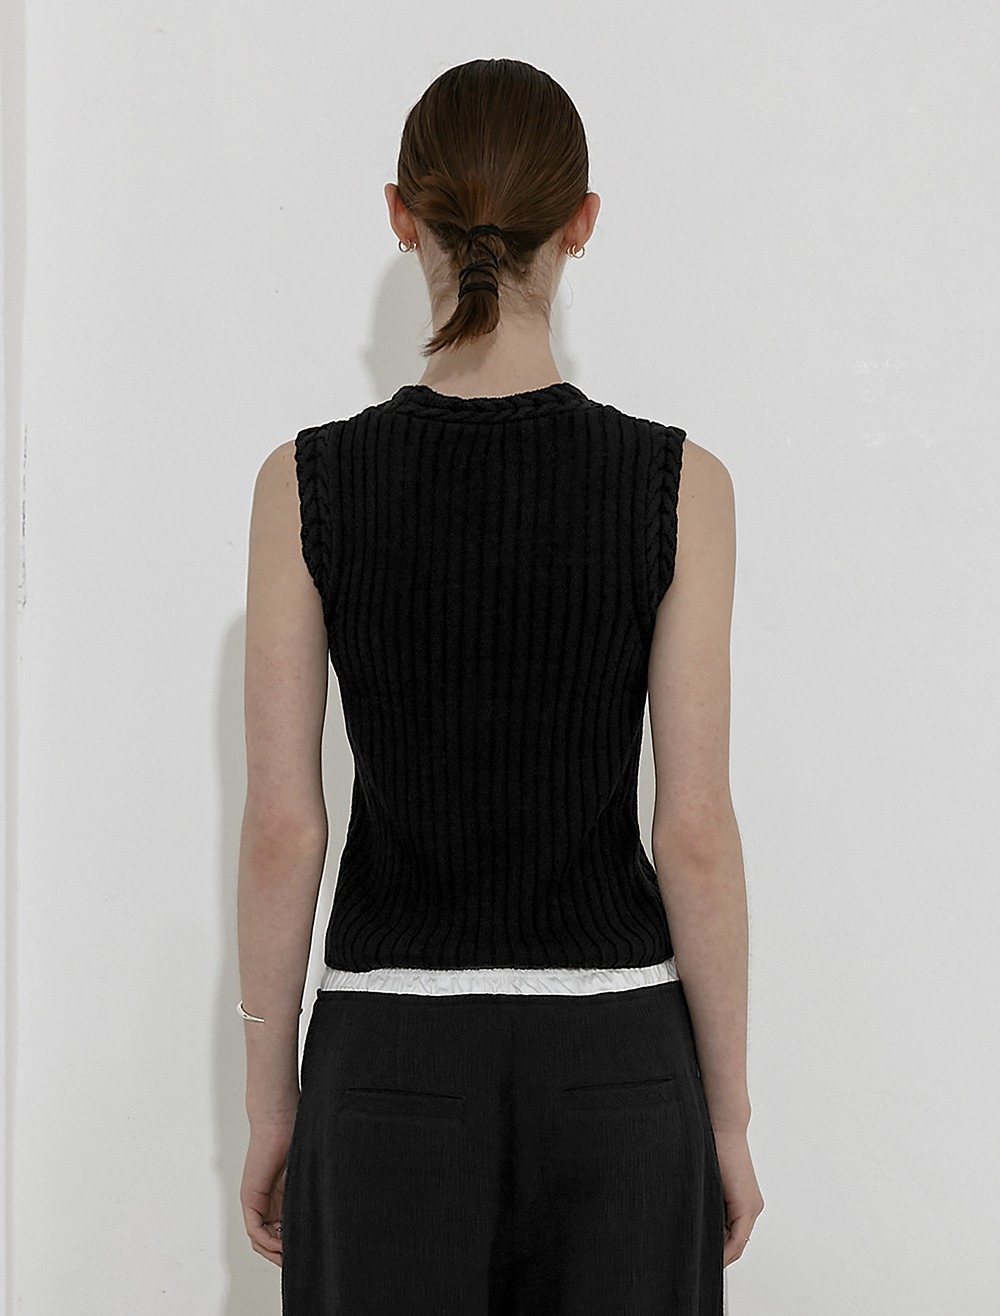 CABLE DETAIL SLEEVELESS KNIT [BLACK]